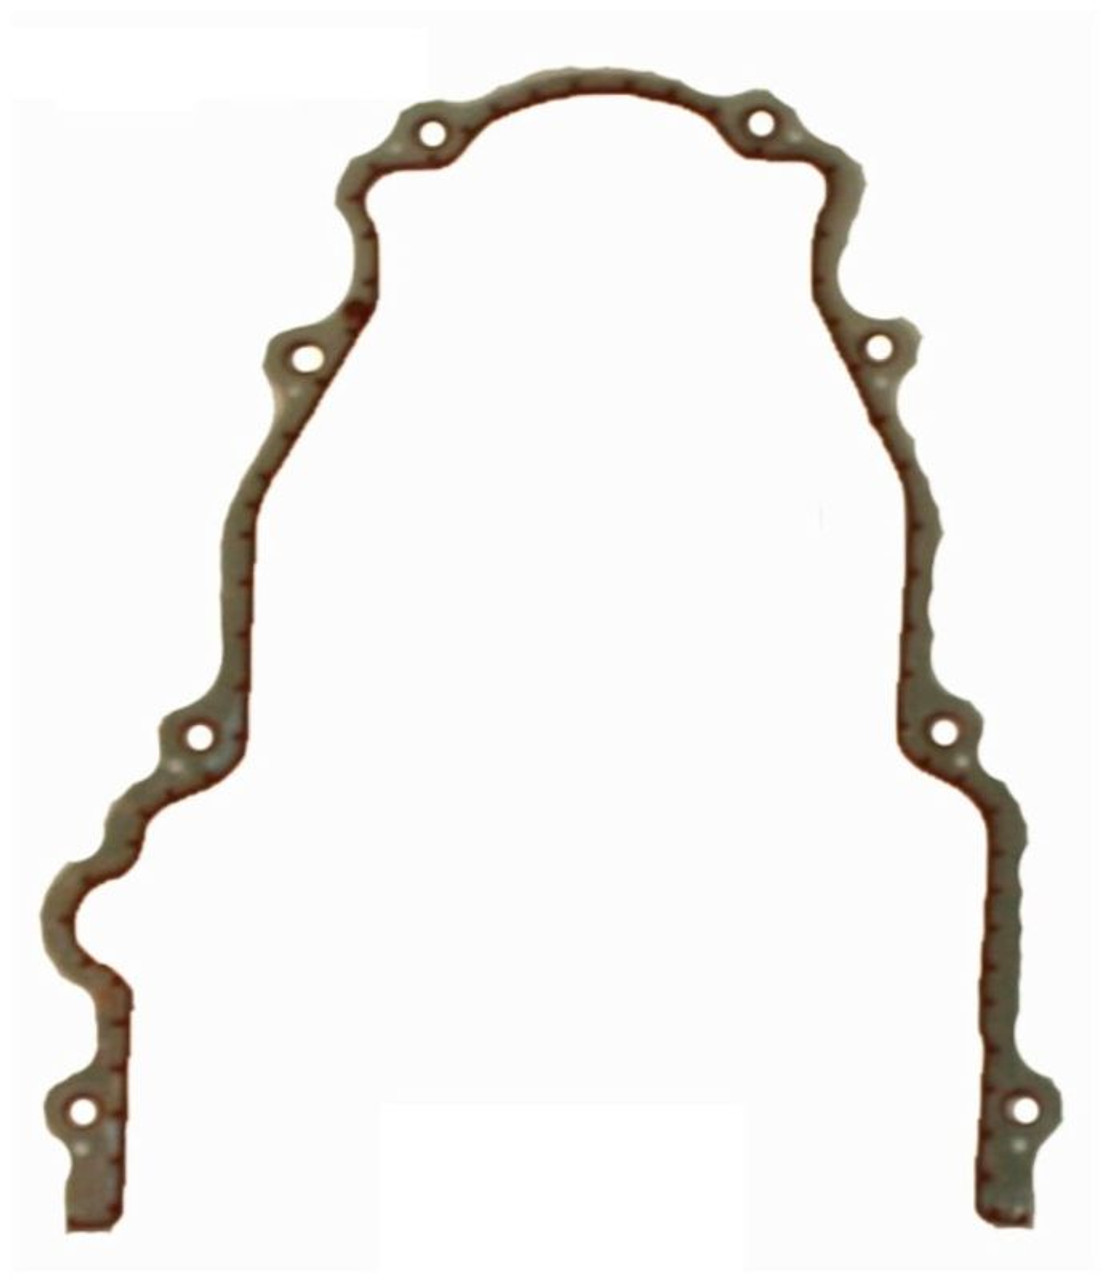 2012 Cadillac Escalade 6.0L Engine Timing Cover Gasket TCG293-A -762